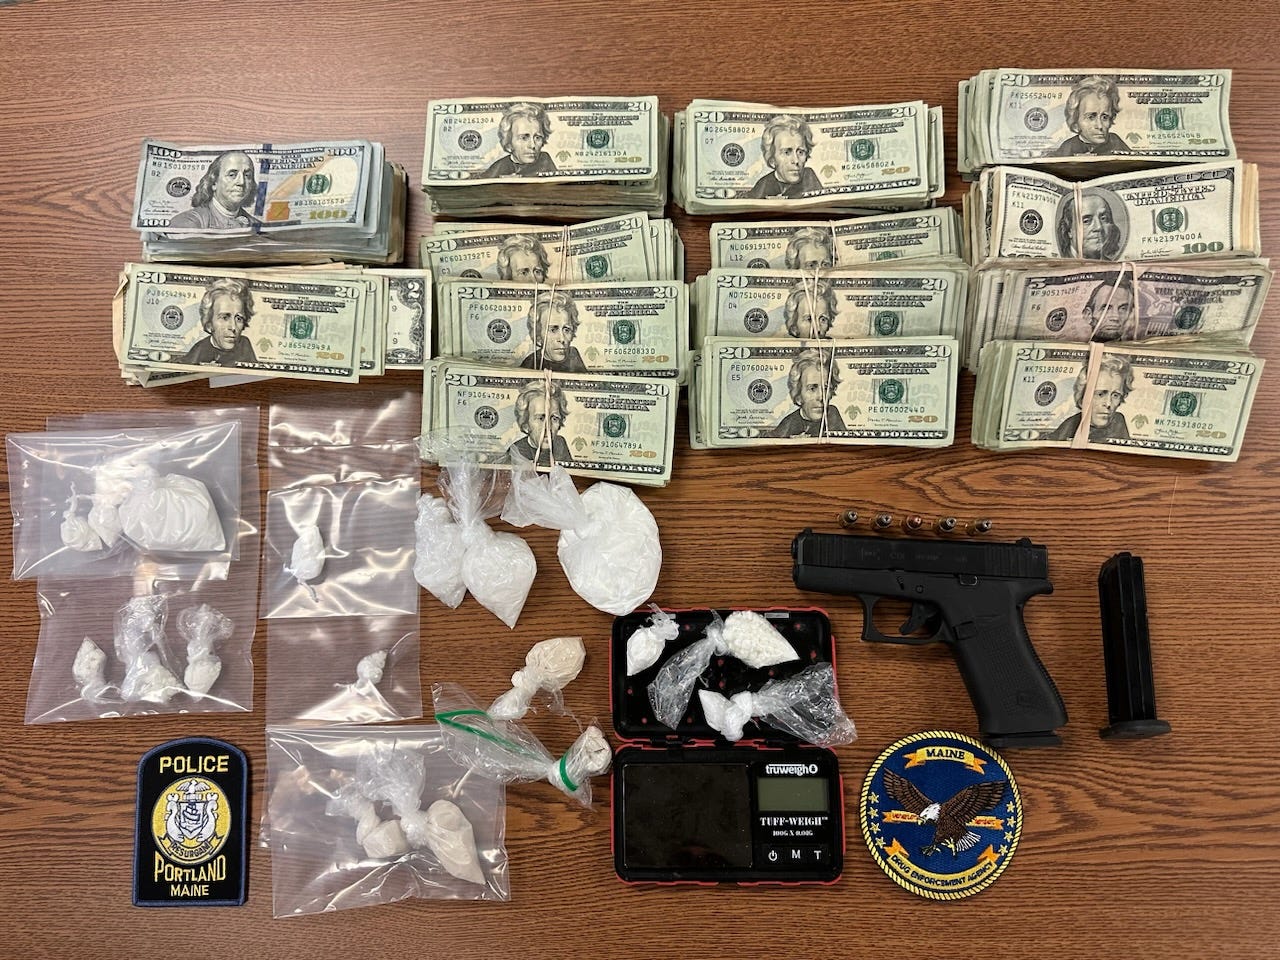 Portland man arrested for selling fentanyl and cocaine, officials say